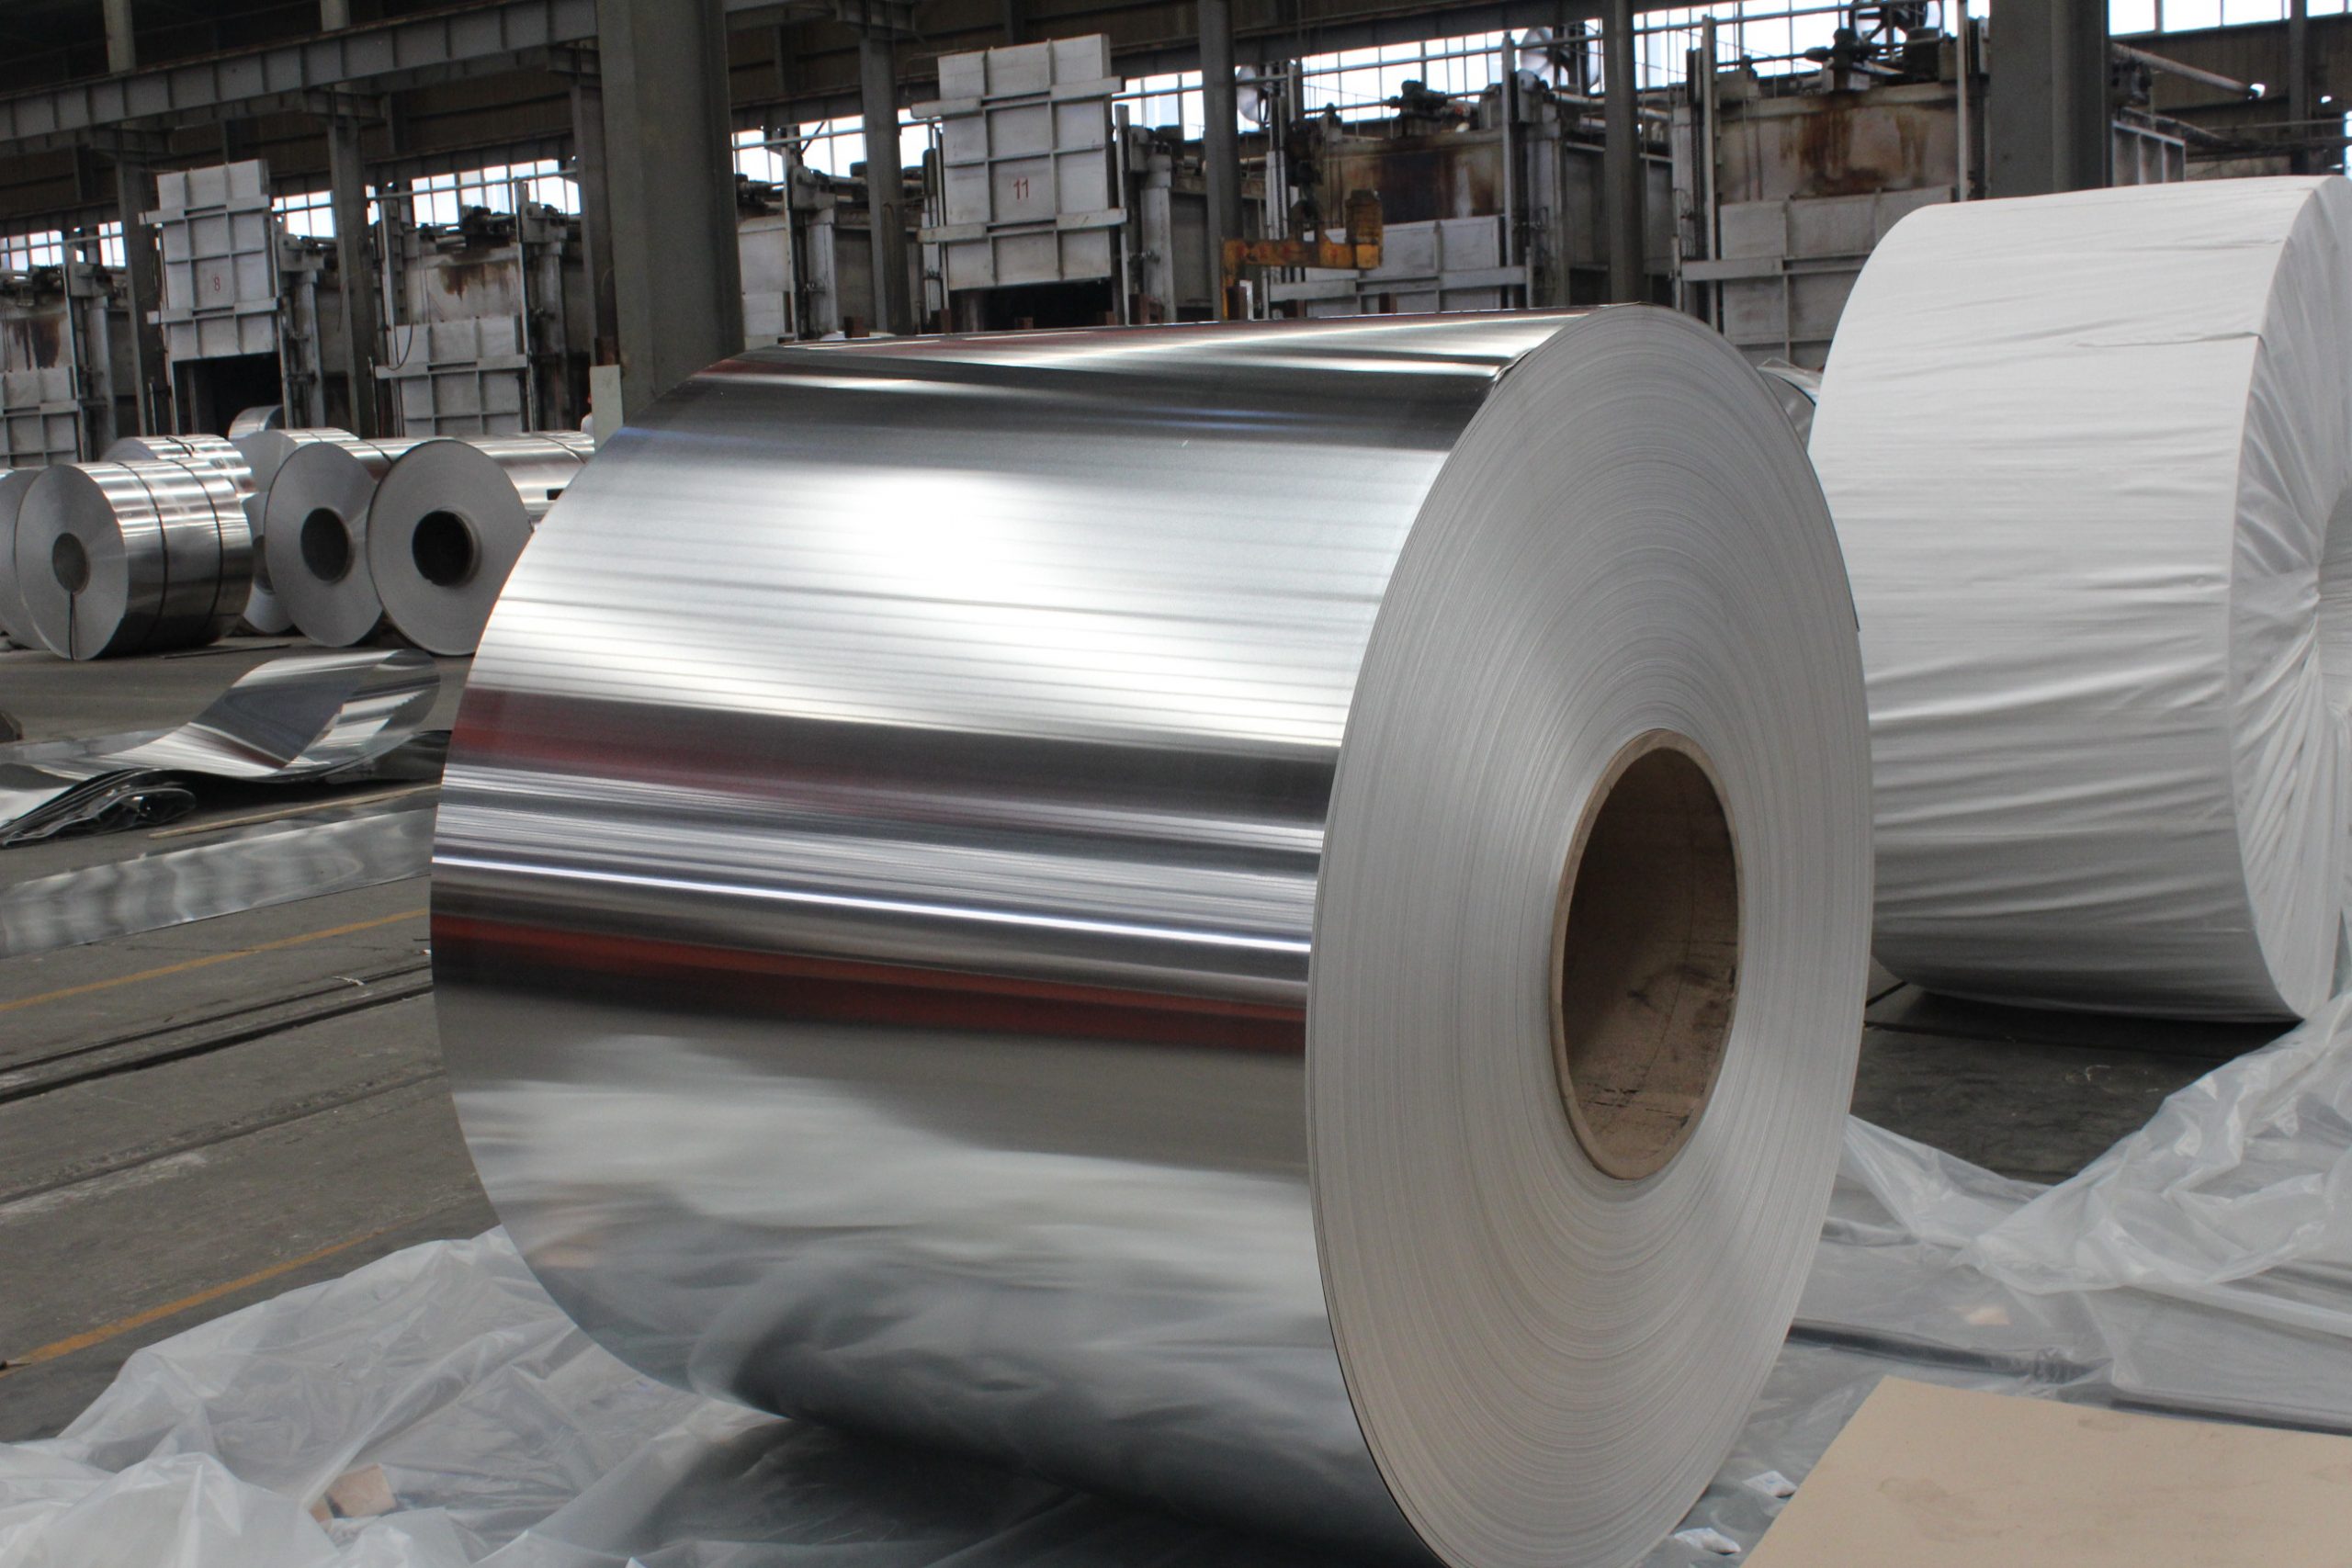 Anti-Corrosion, Heat Resistant 3105 Alloy Metal Aluminum Coil For Agriculture